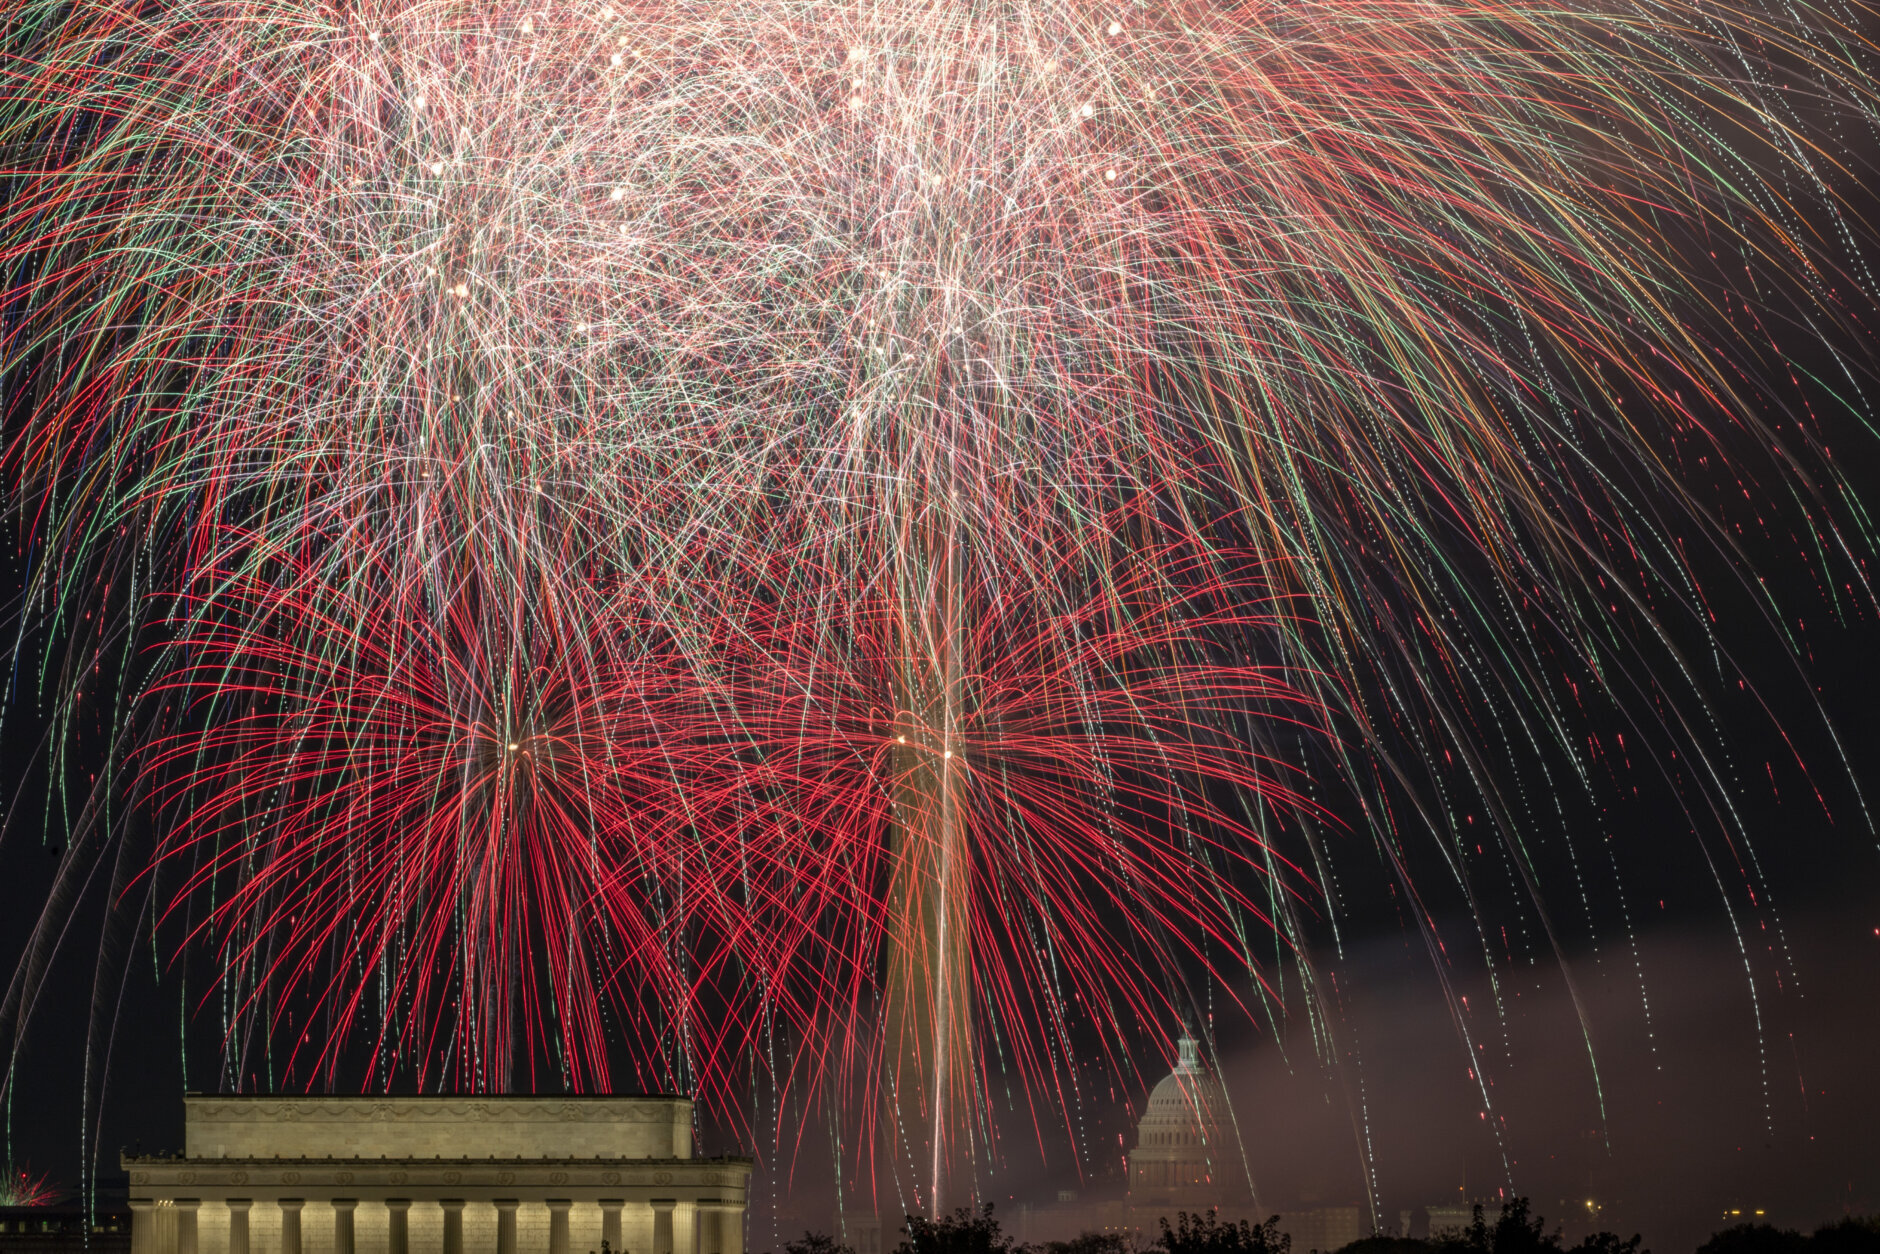 Fireworks burst on the National Mall above the Lincoln Memorial, Washington Monument and the U.S. Capitol building during Independence Day celebrations in Washington, late Tuesday, July 4, 2023. (AP Photo/Stephanie Scarbrough)